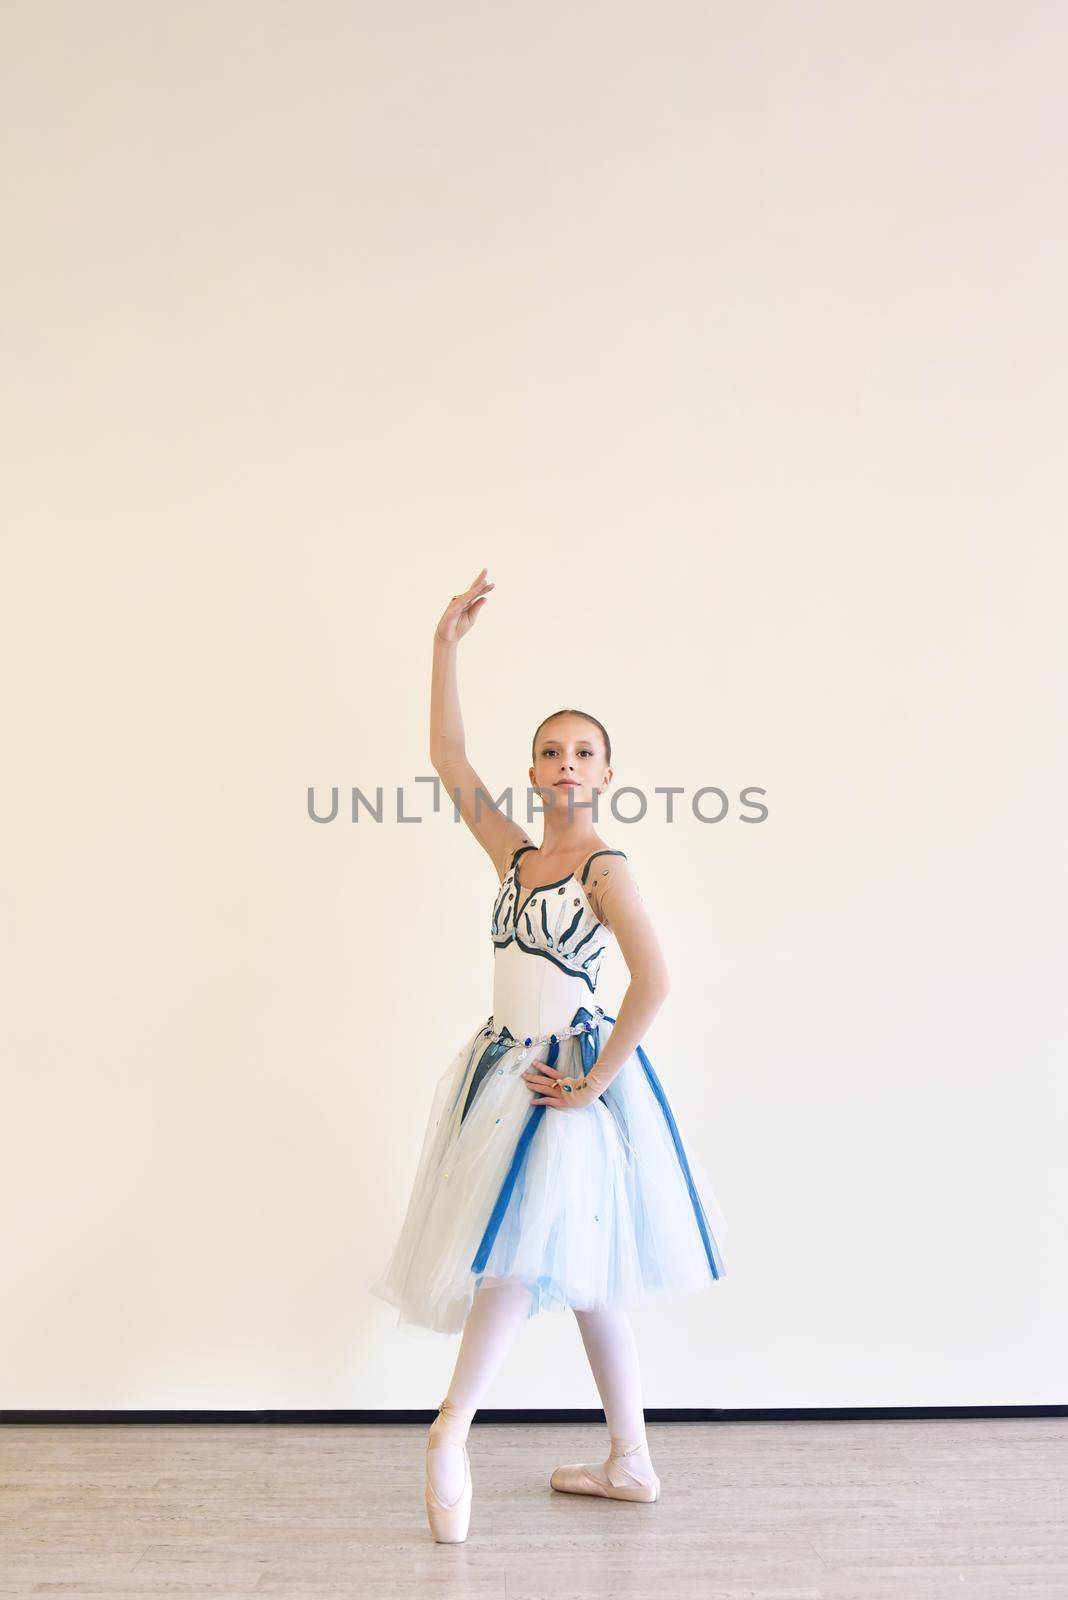 A young ballerina in a dress practicing ballet poses in the studio by Nickstock